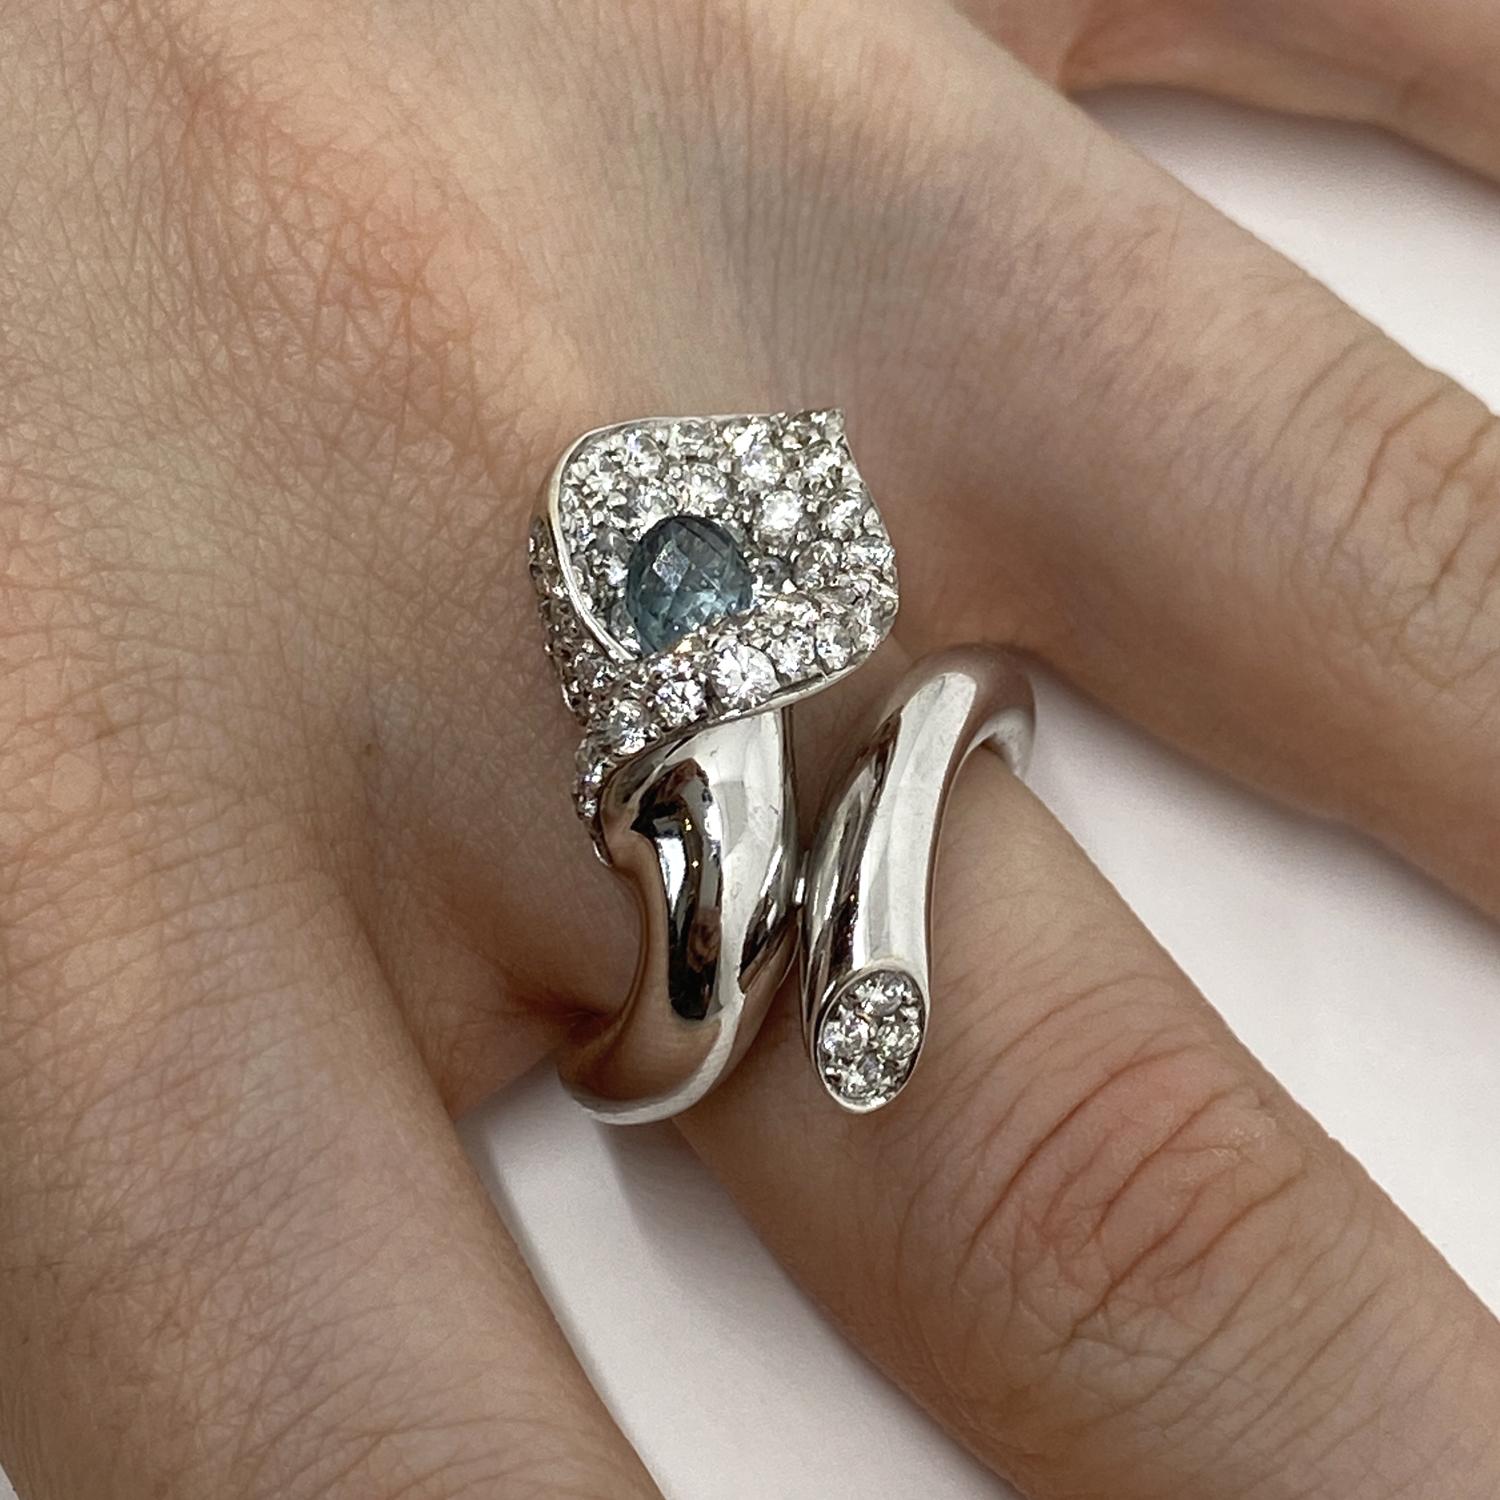 Arum Flower ring made of 18kt white gold with natural brilliant-cut diamonds for ct.1.56 and natural briole-cut sapphire for ct .1.19

Welcome to our jewelry collection, where every piece tells a story of timeless elegance and unparalleled